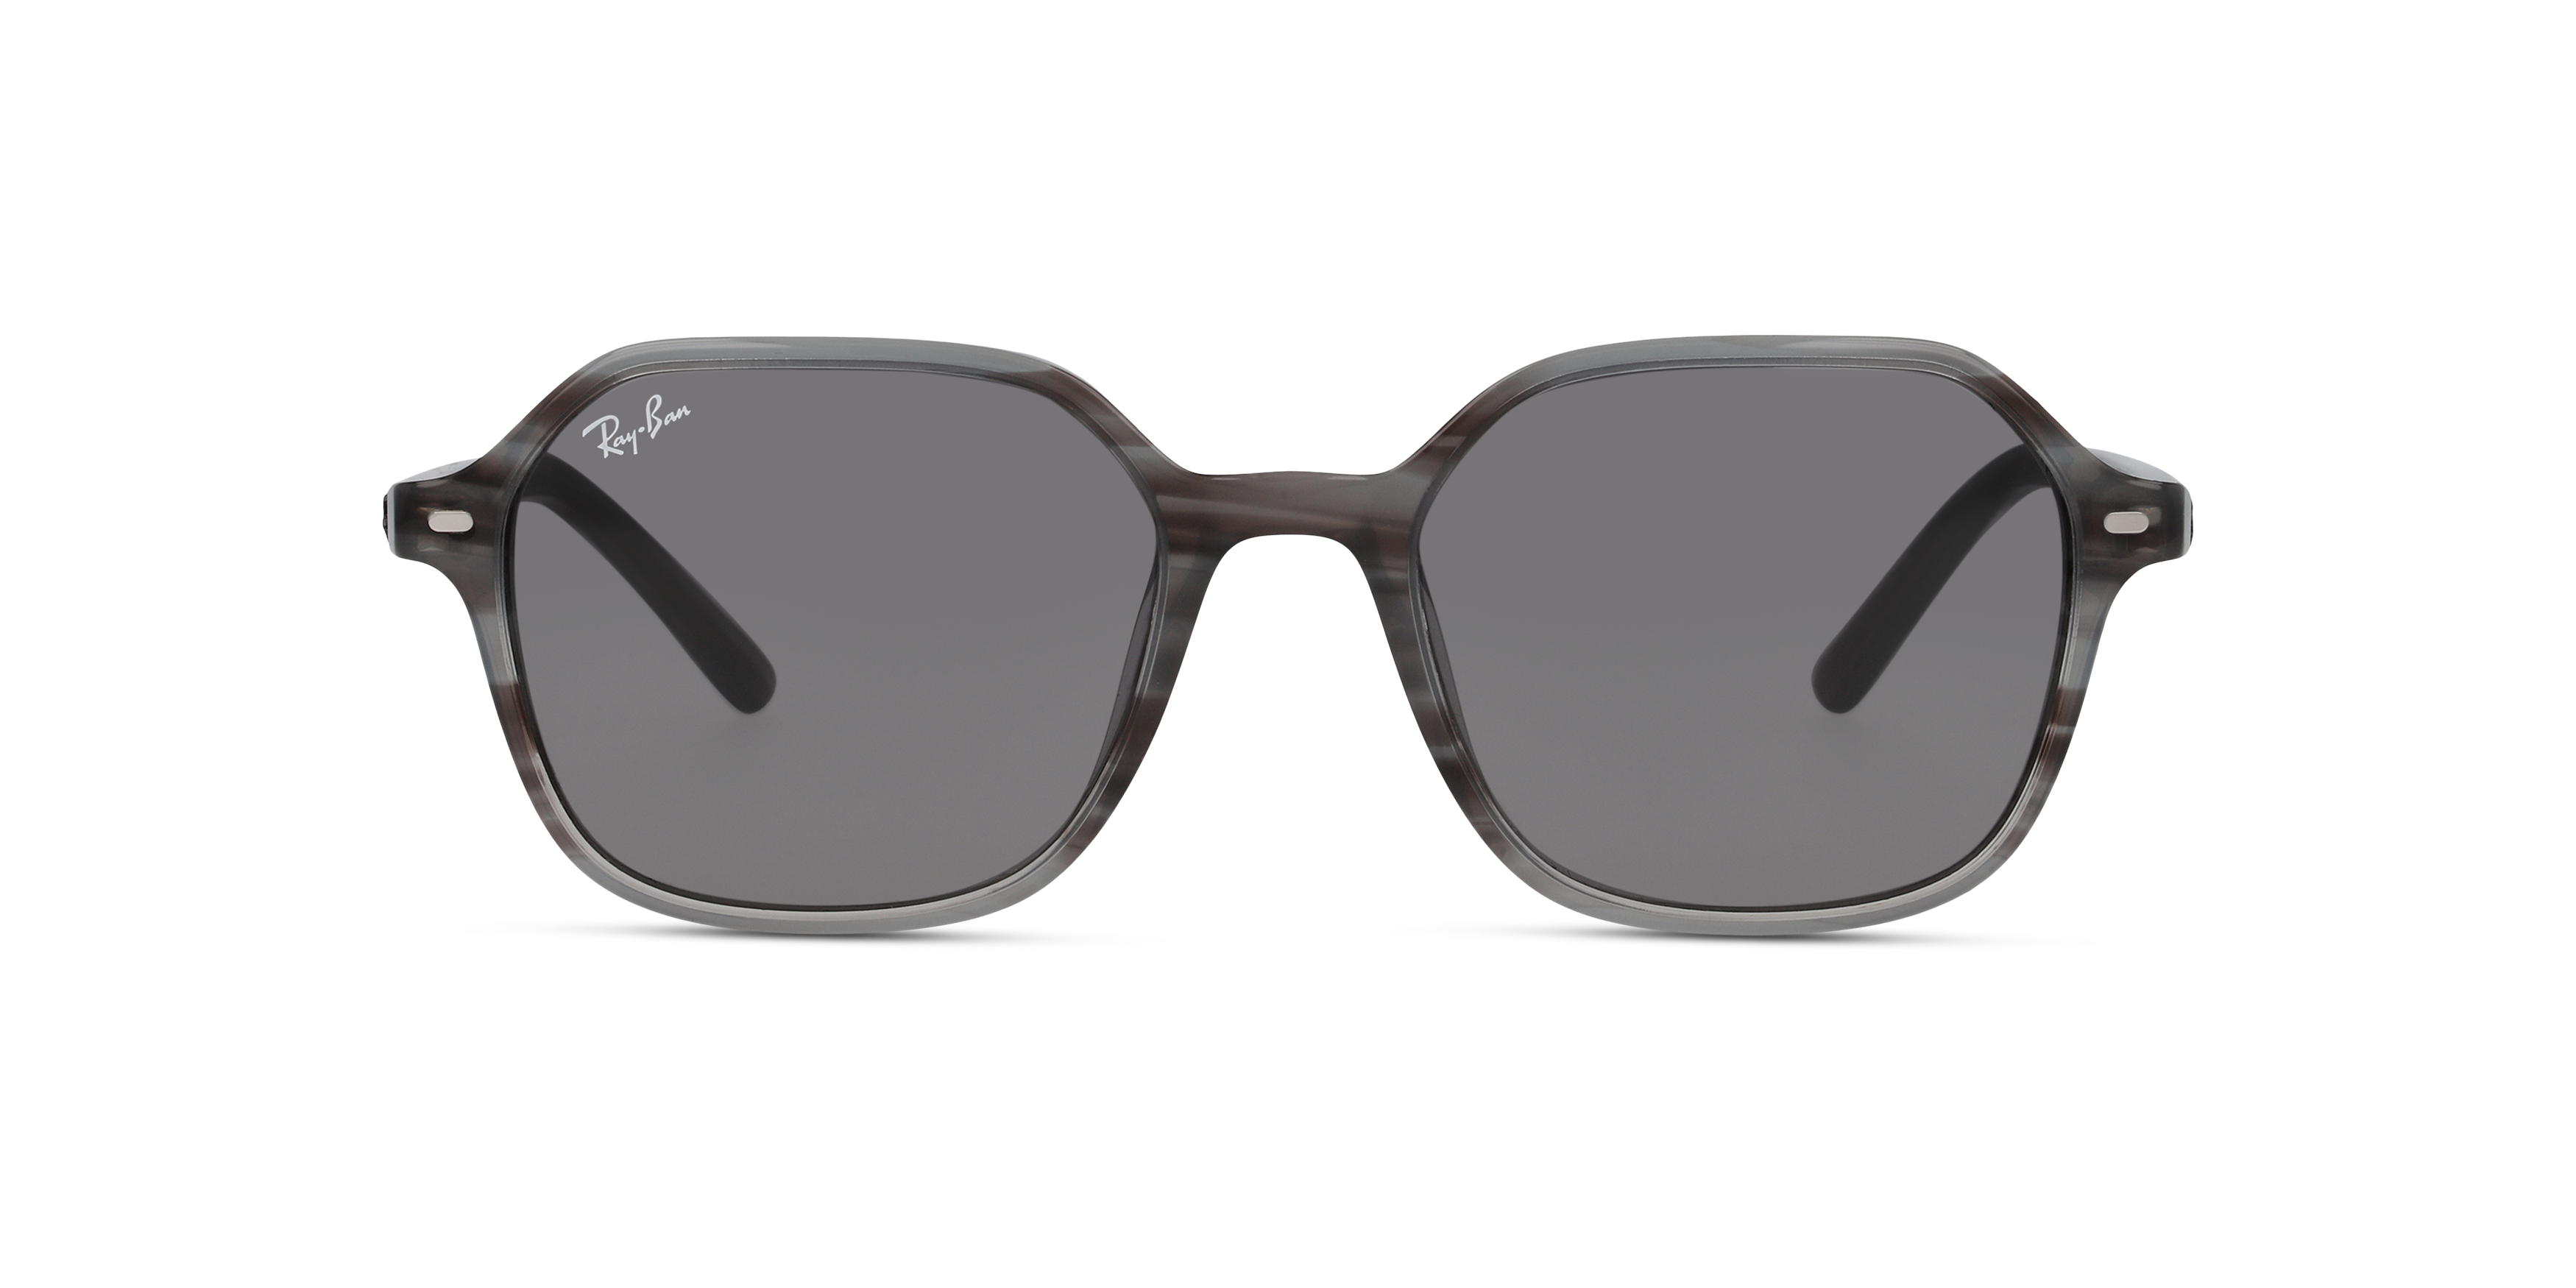 [products.image.front] RAY-BAN RB2194 1314B1